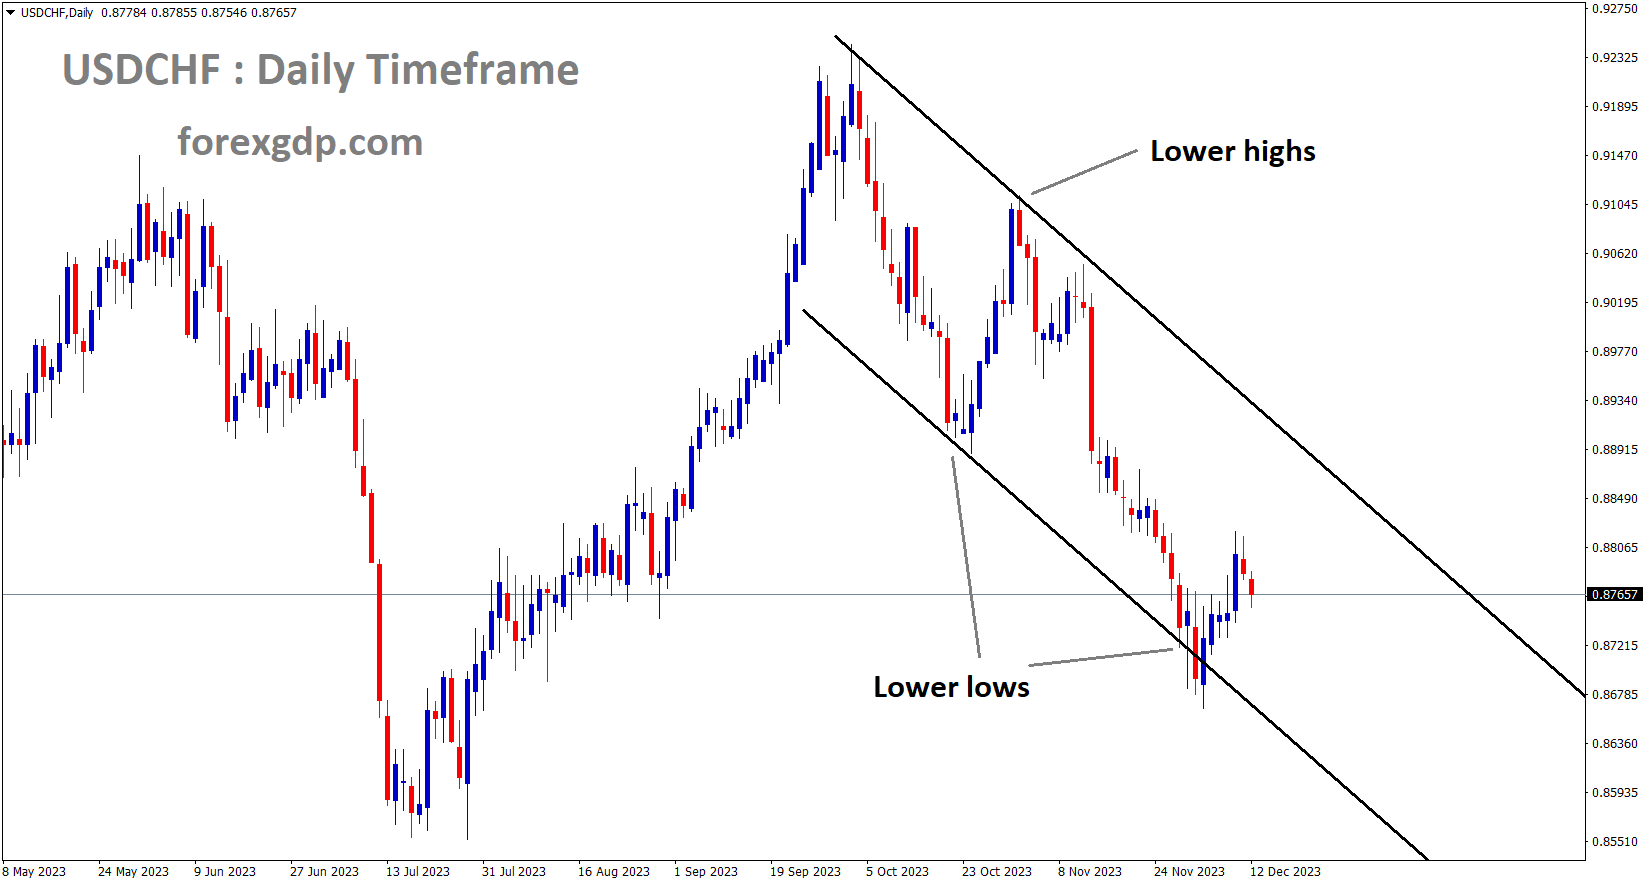 USDCHF is moving in Descending channel and the Market has rebounded from the lower low area